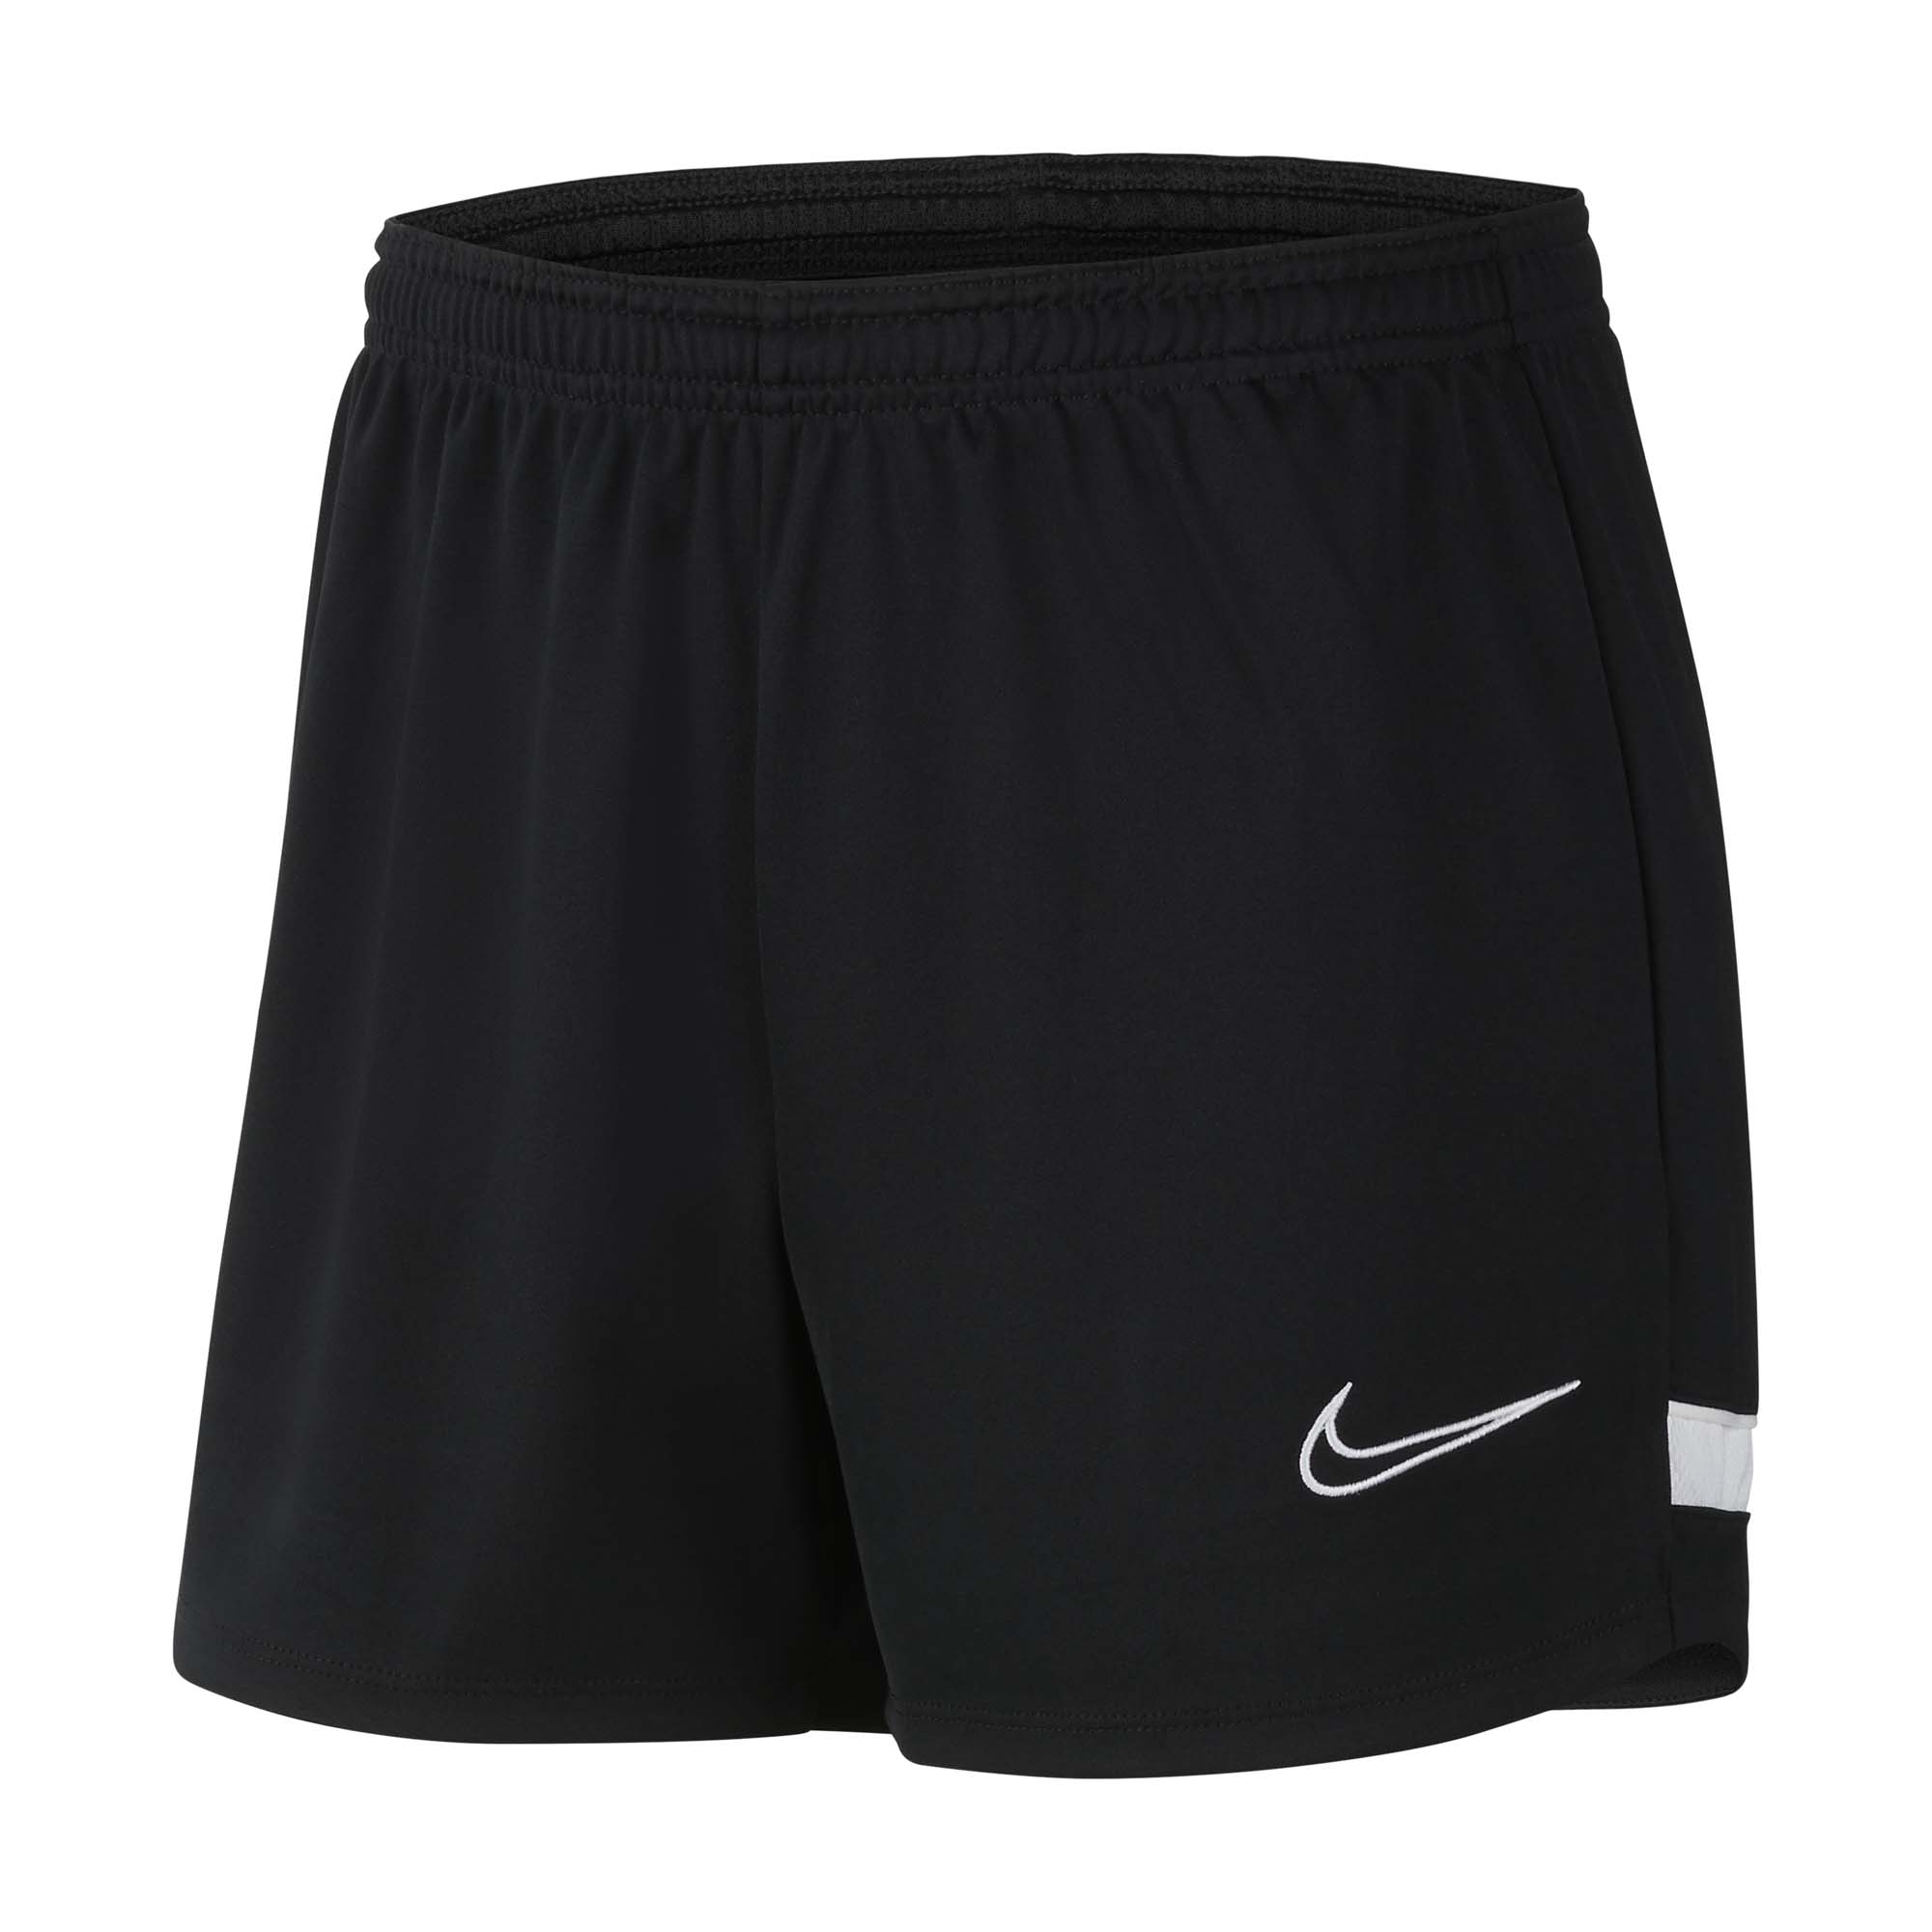 nike dri-fit academy women's knit s#Material:-